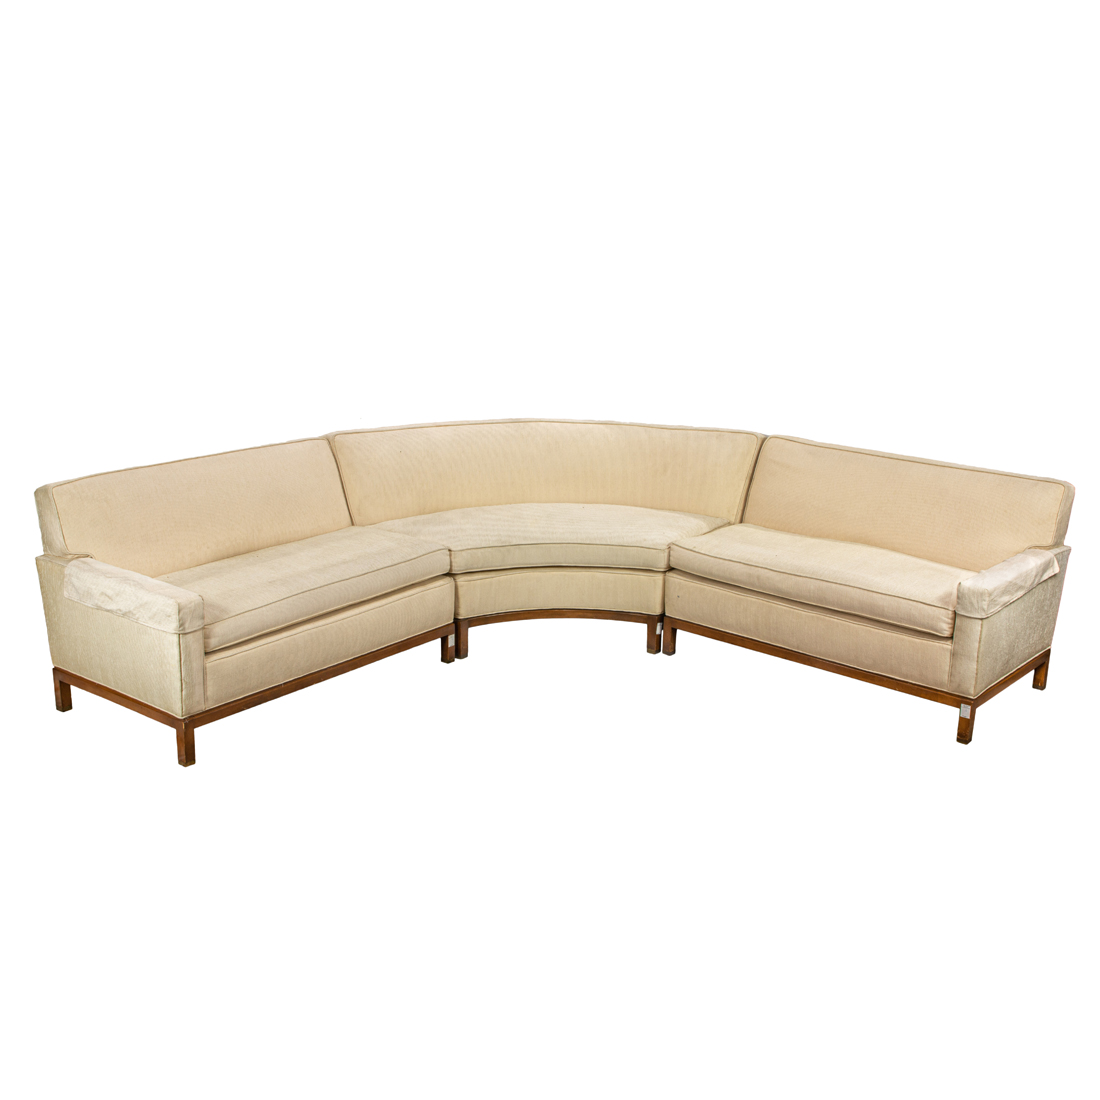 MODERN CREAM UPHOLSTERED CURVED 3a0d95